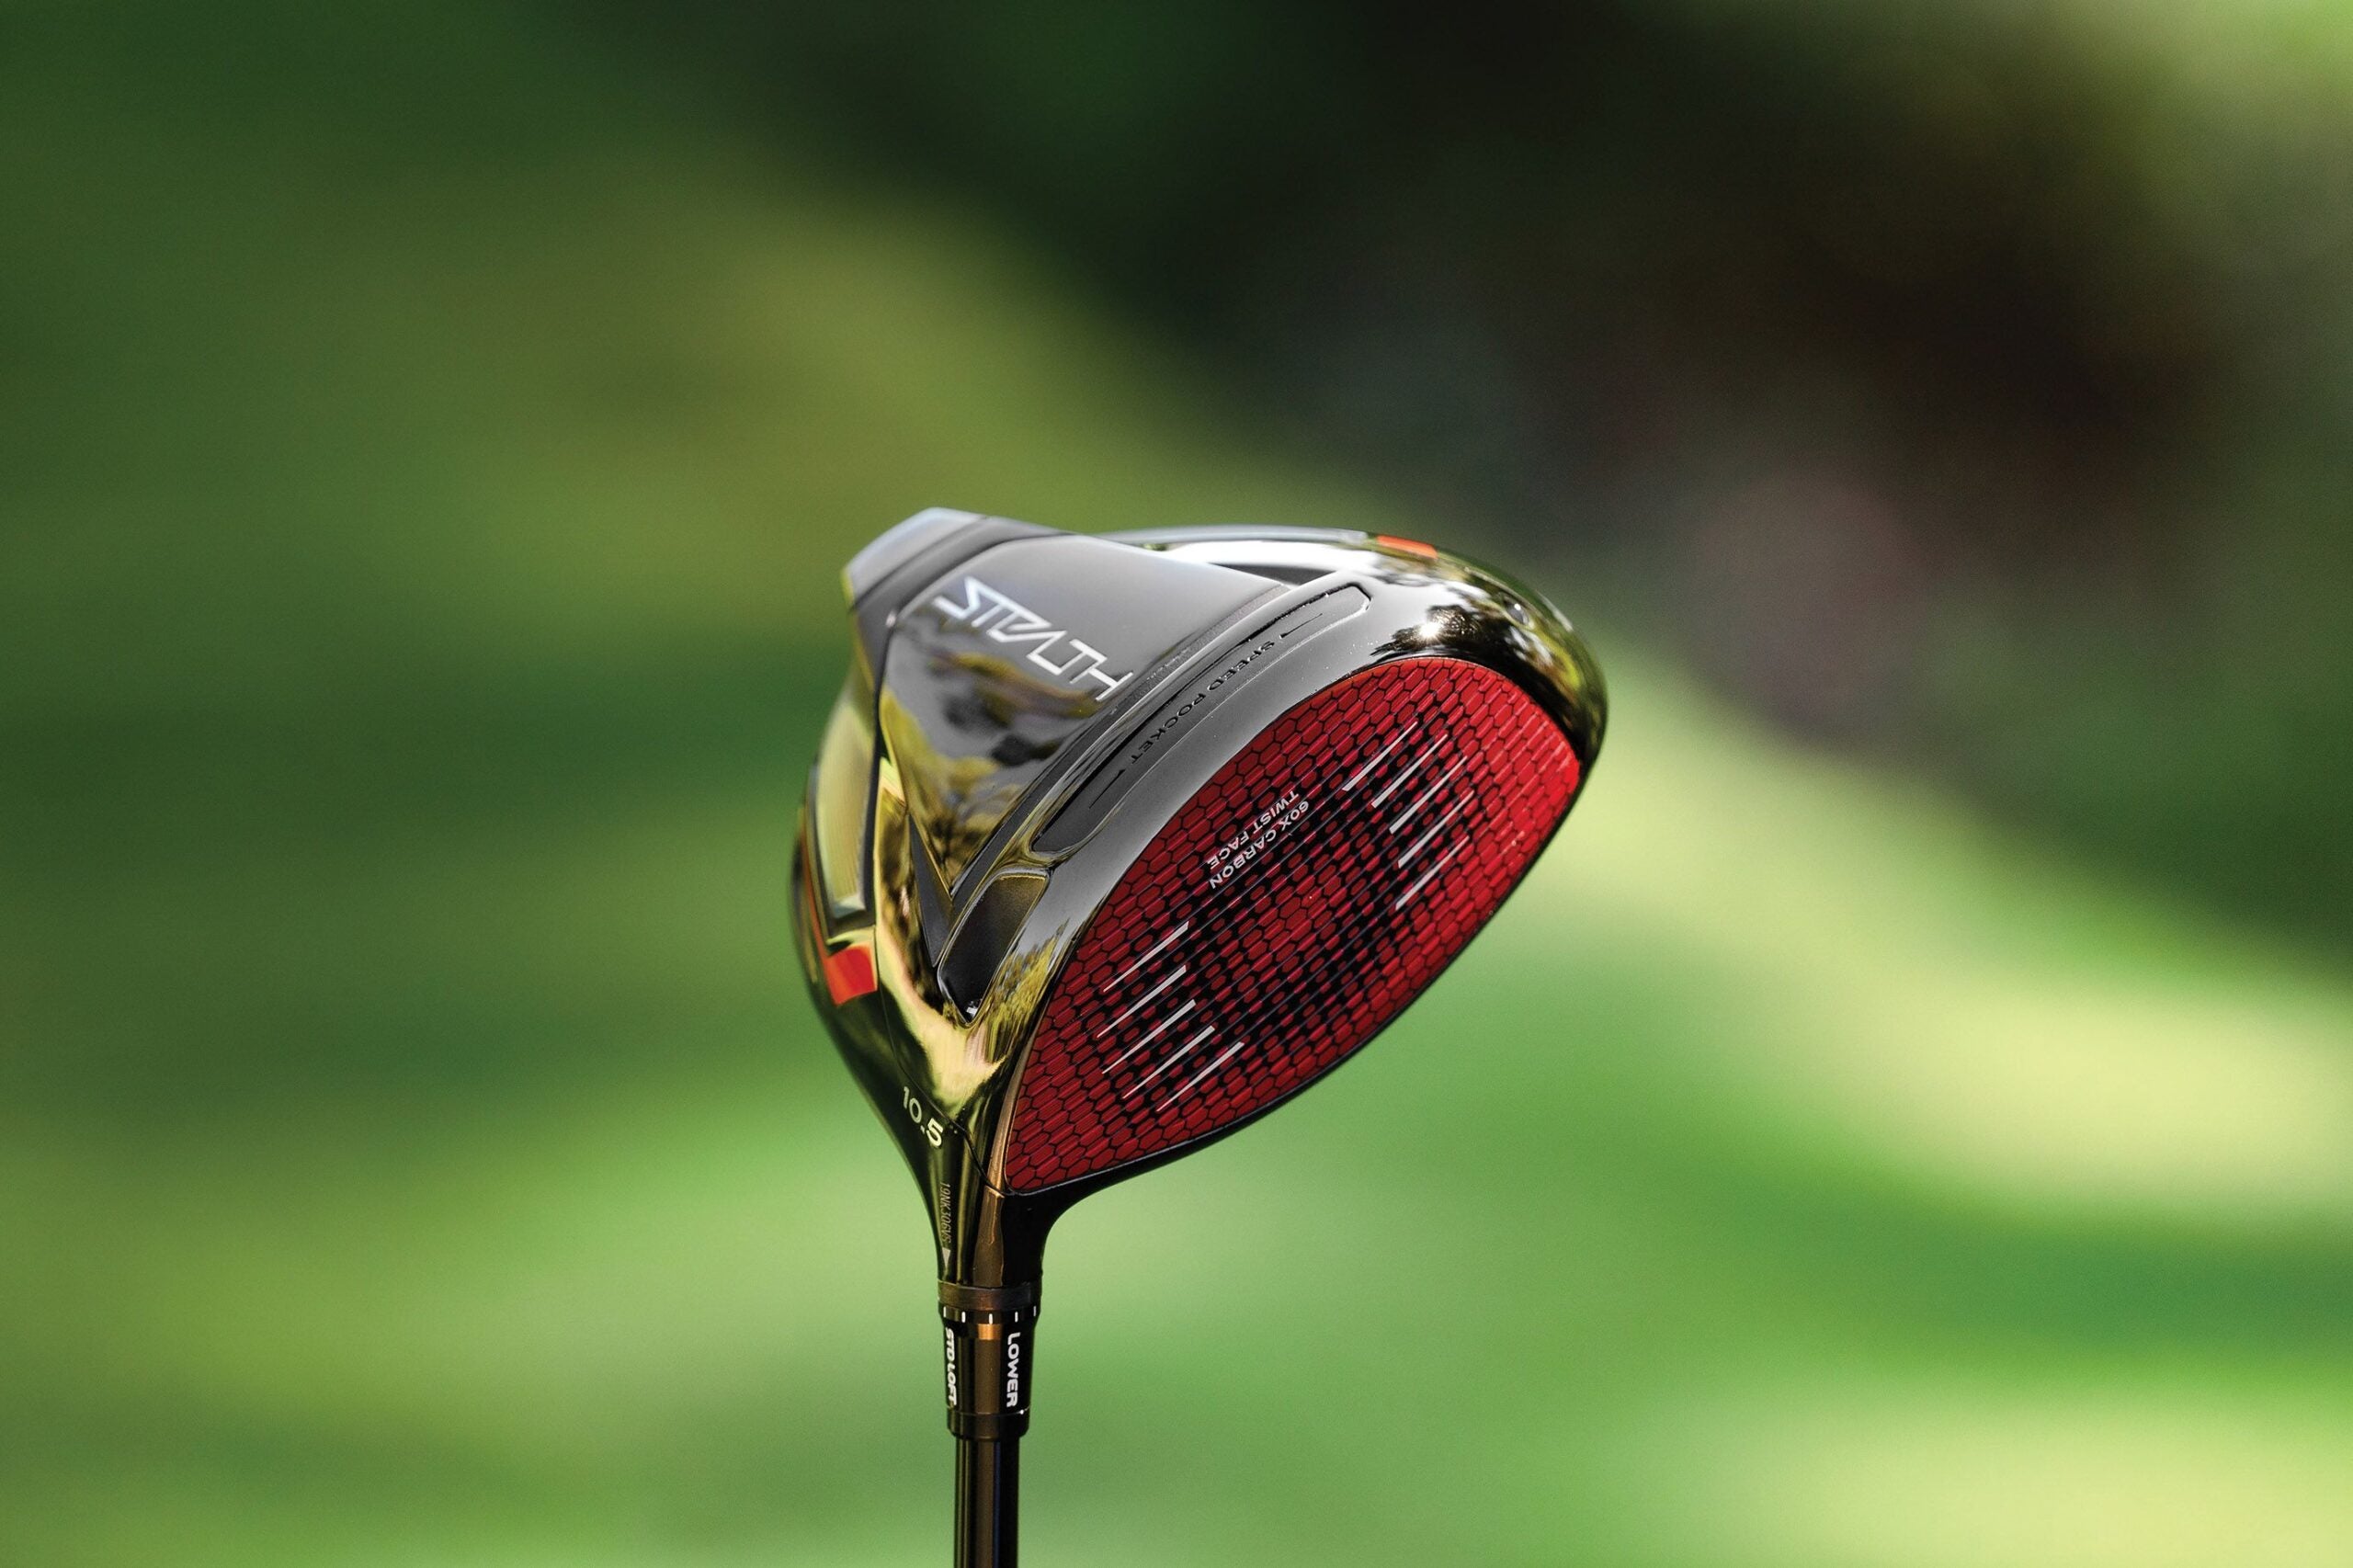 How TaylorMade modified titanium with carbon fiber in its new driver face